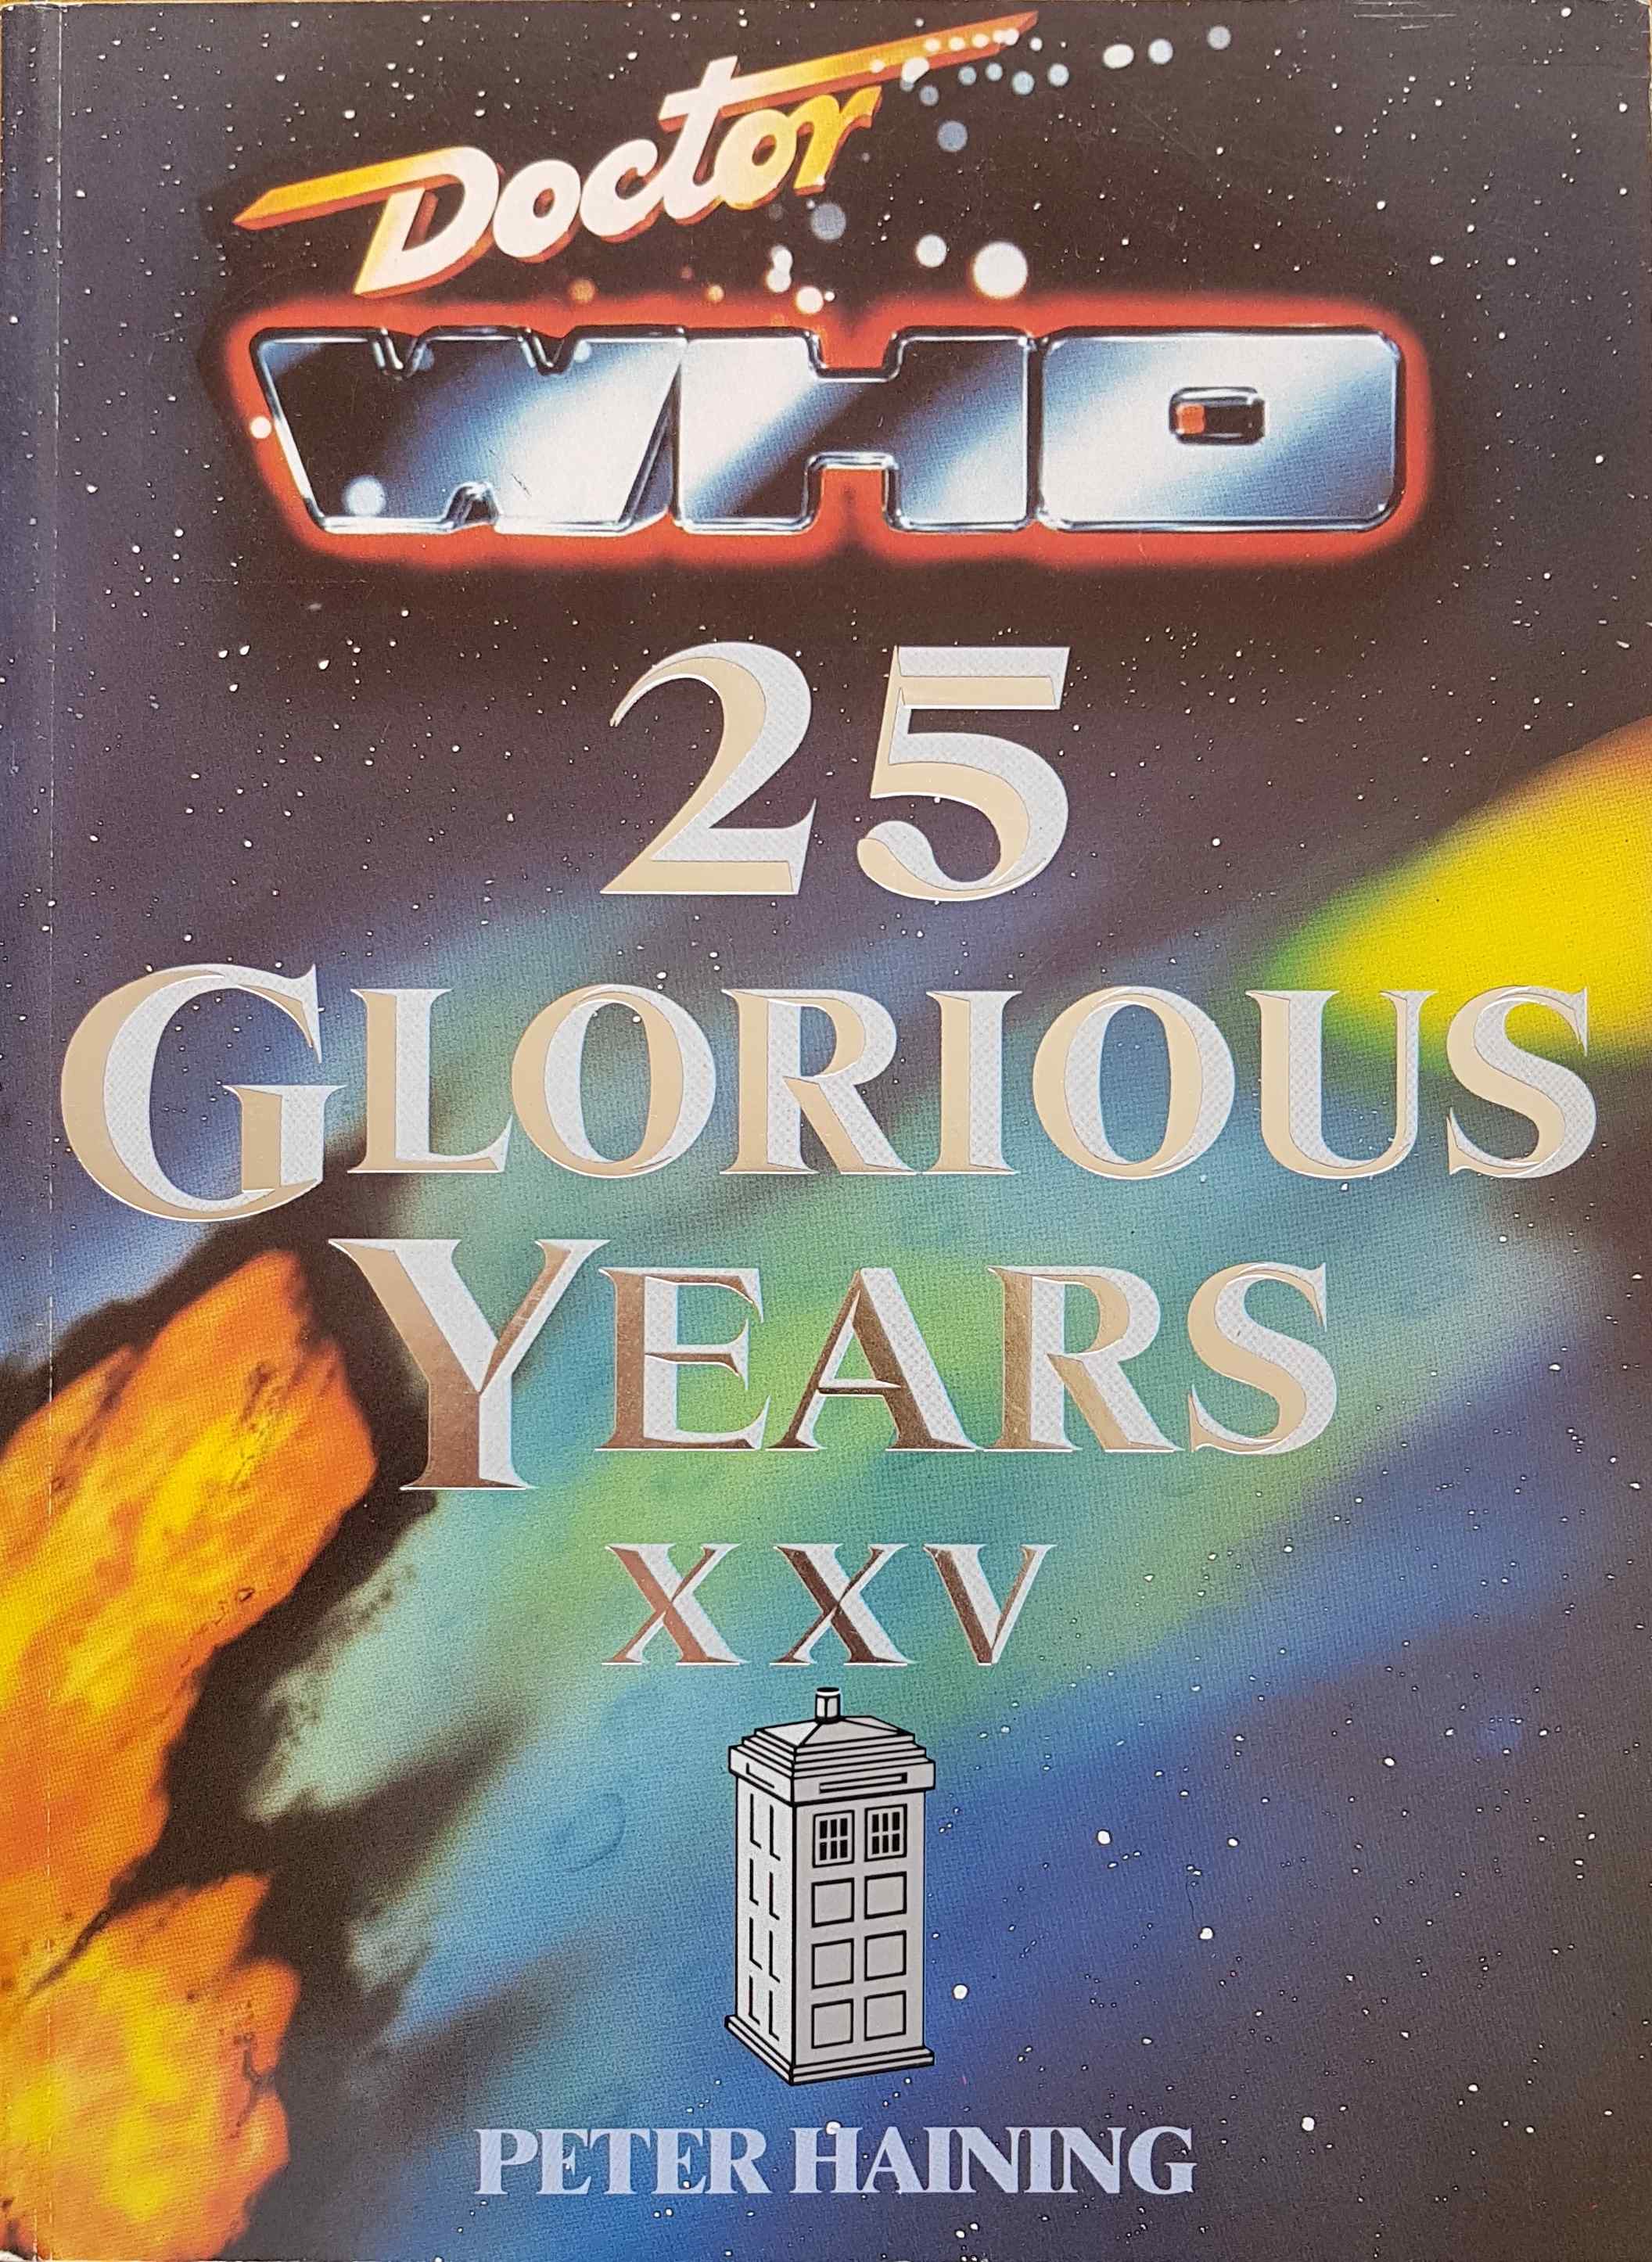 Picture of 0-86369-324-5 Doctor Who - 25 glorious years by artist Peter Haining from the BBC records and Tapes library